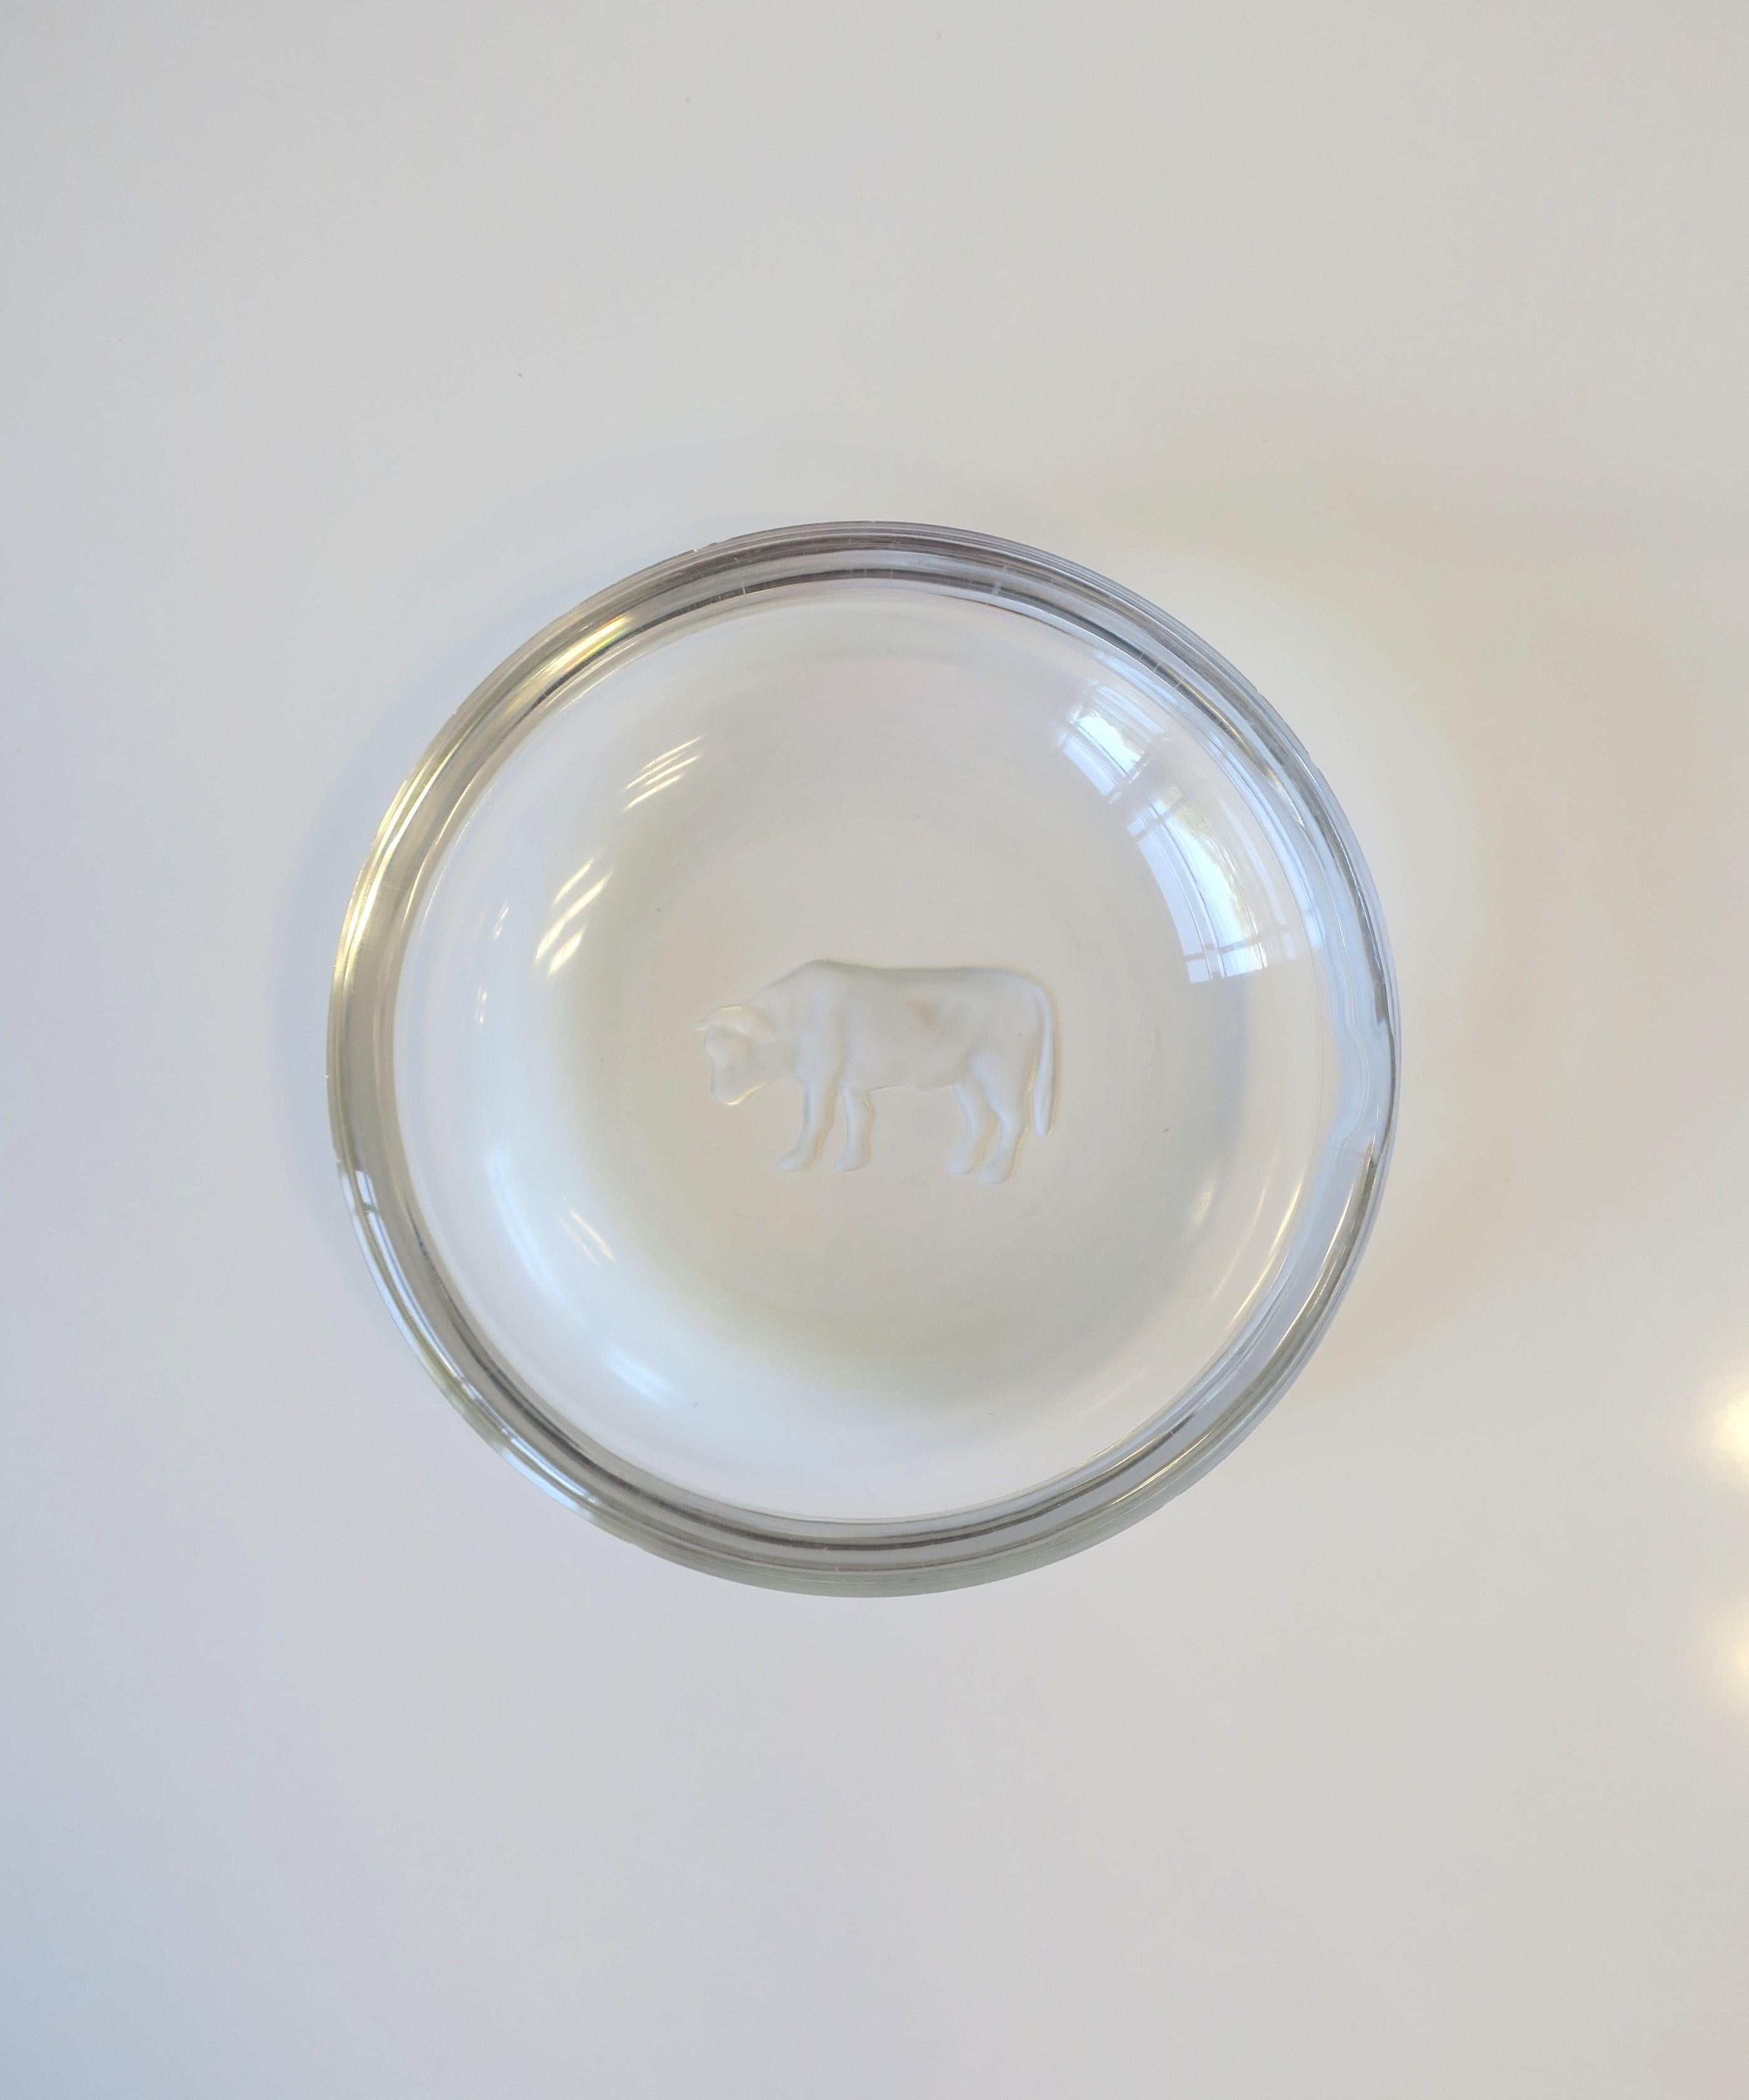 A substantial Belgian crystal round bowl with debossed steer bull animal by luxury crystal Maison, Val Saint Lambert, circa mid to late-20th century, Belgium. Steer bull at center of bowl/dish, with tiny etched authentication initials 'VSL', for